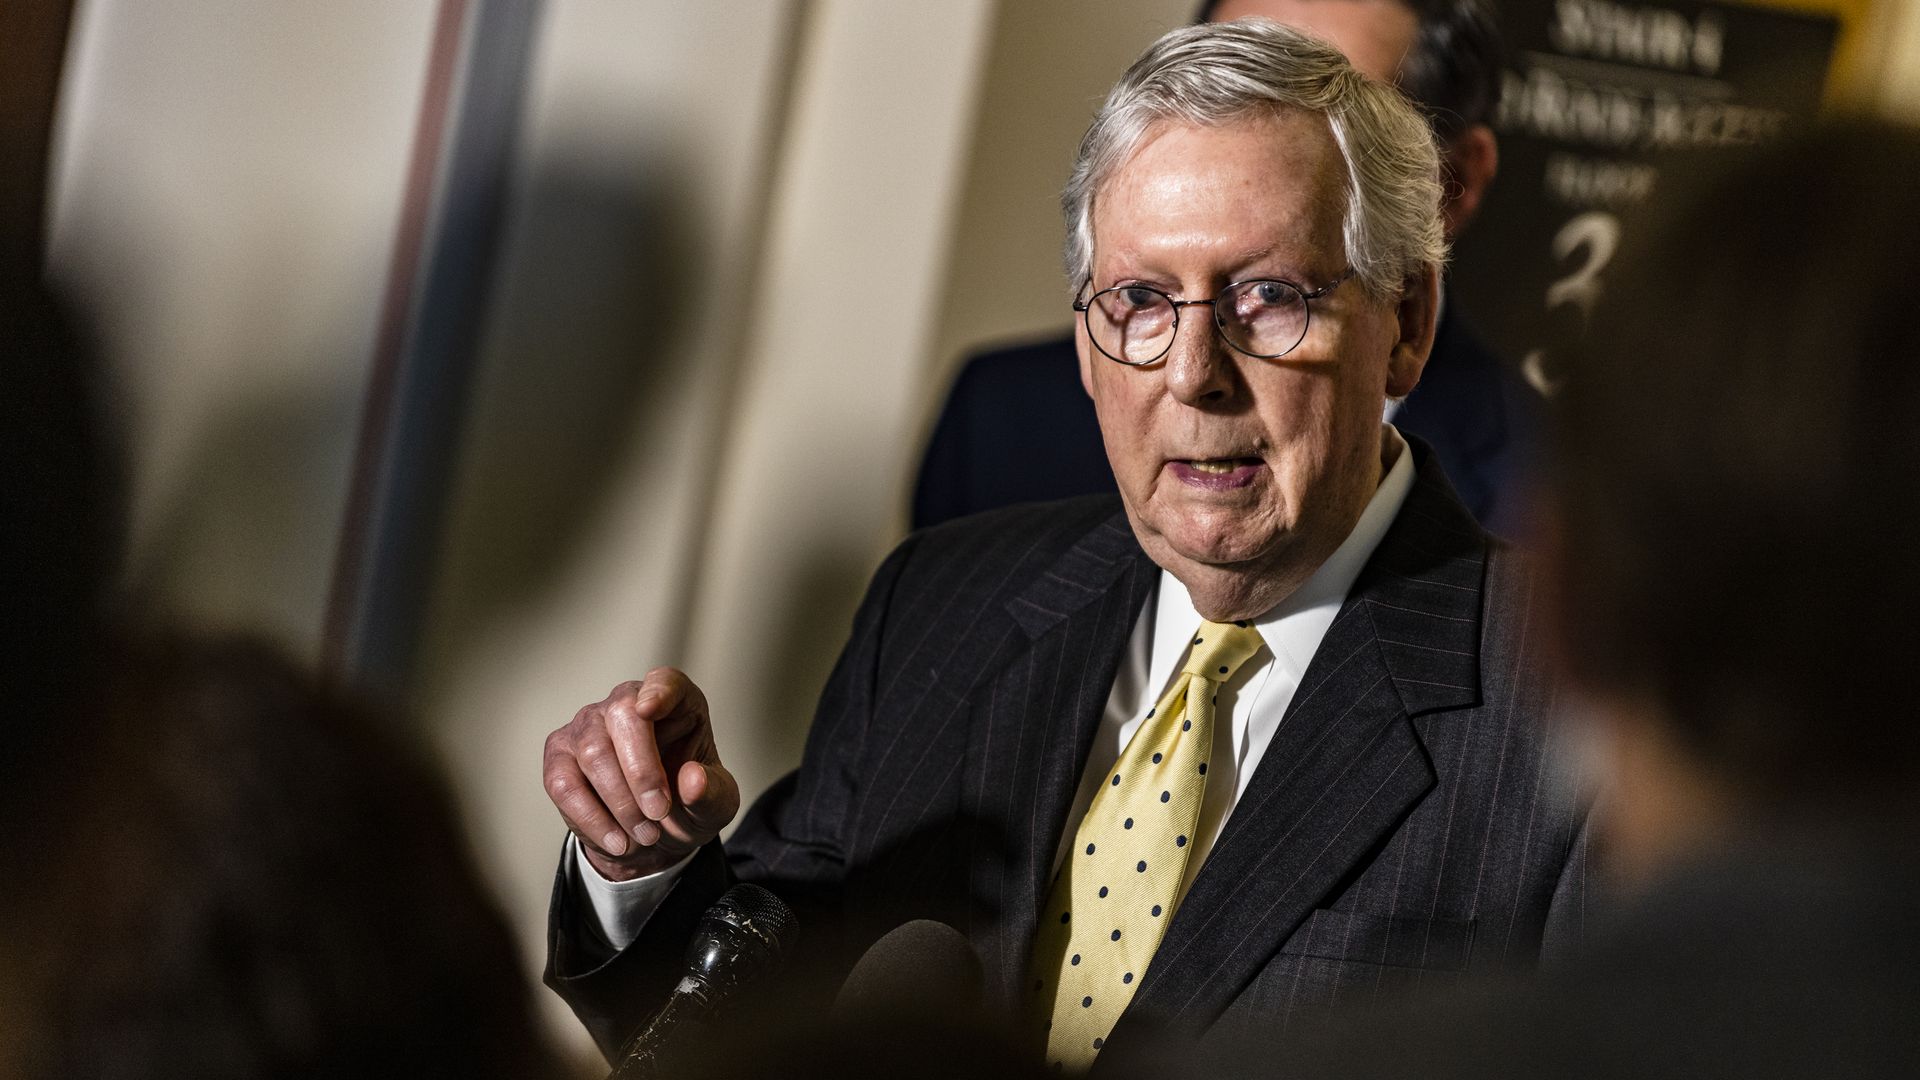 McConnell points a finger while wearing a suit and tie